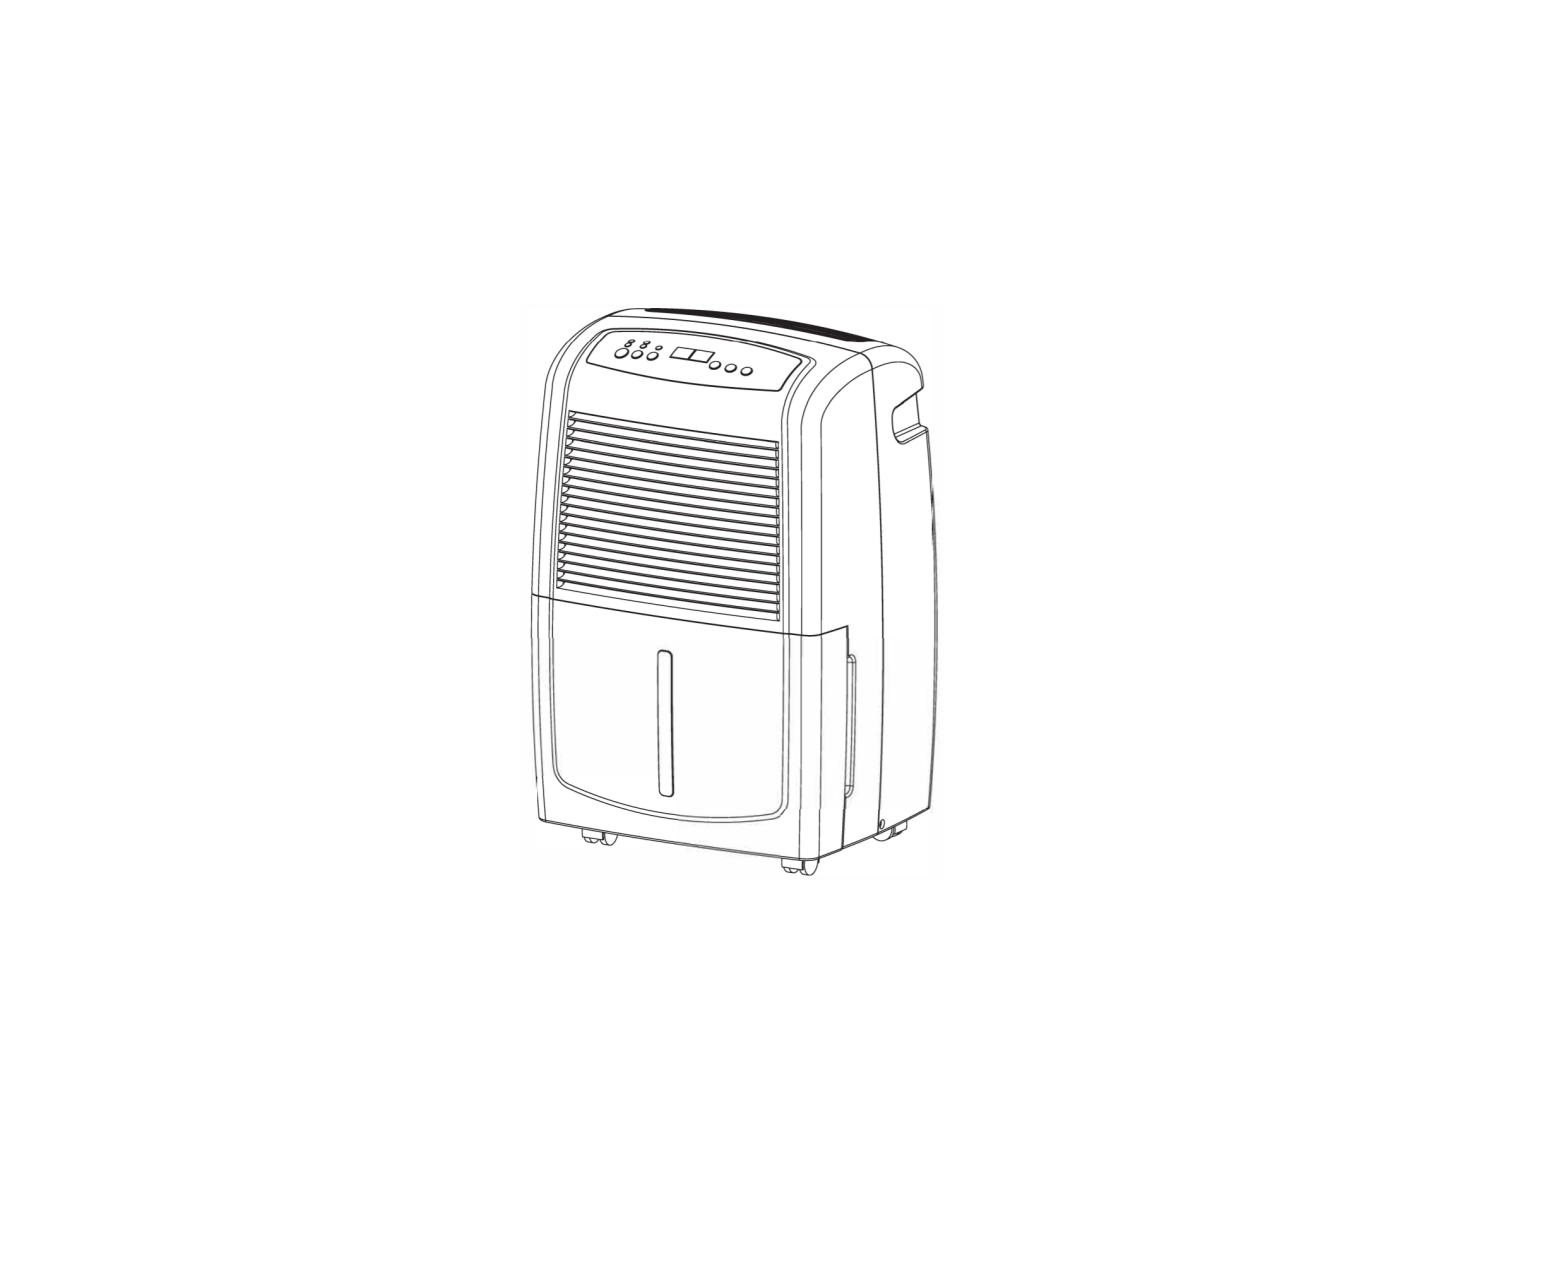 Whynter RPD-551EWP 50 Pint High Capacity up to 4000 sq ft Portable Dehumidifier Instruction Manual